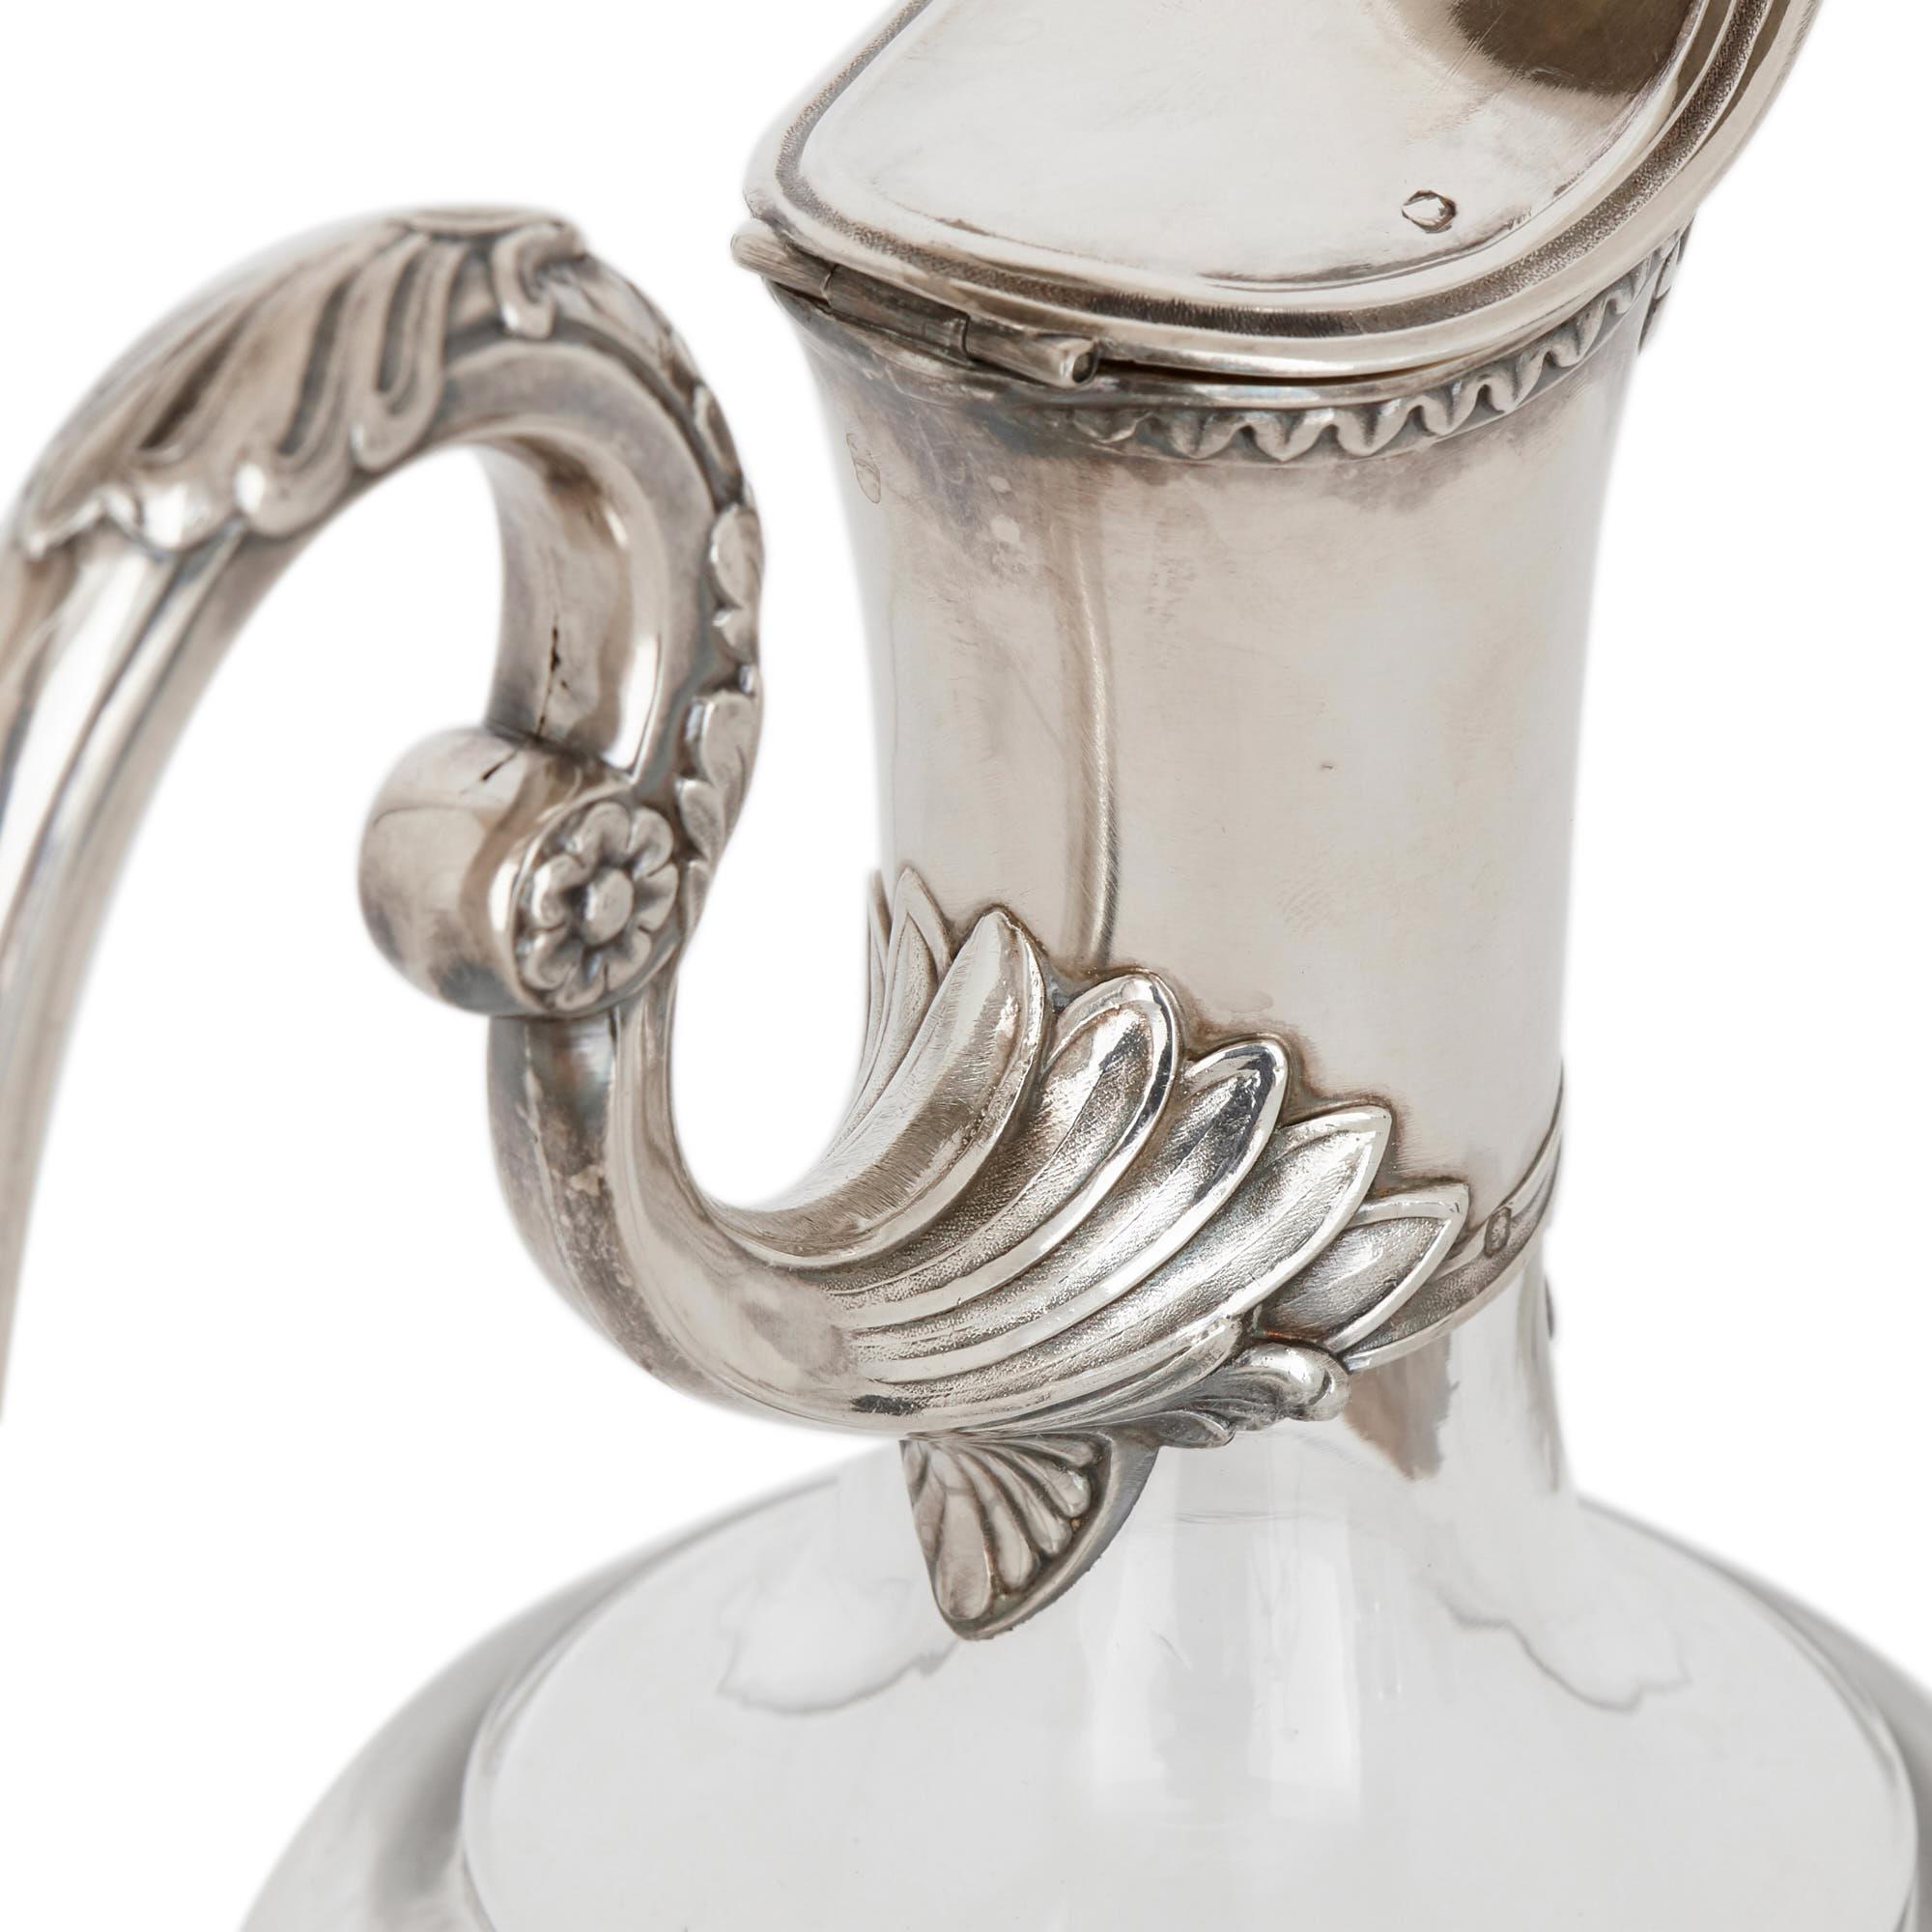 Two Art Nouveau Silver and Glass Wine Jugs by Devaux For Sale 1